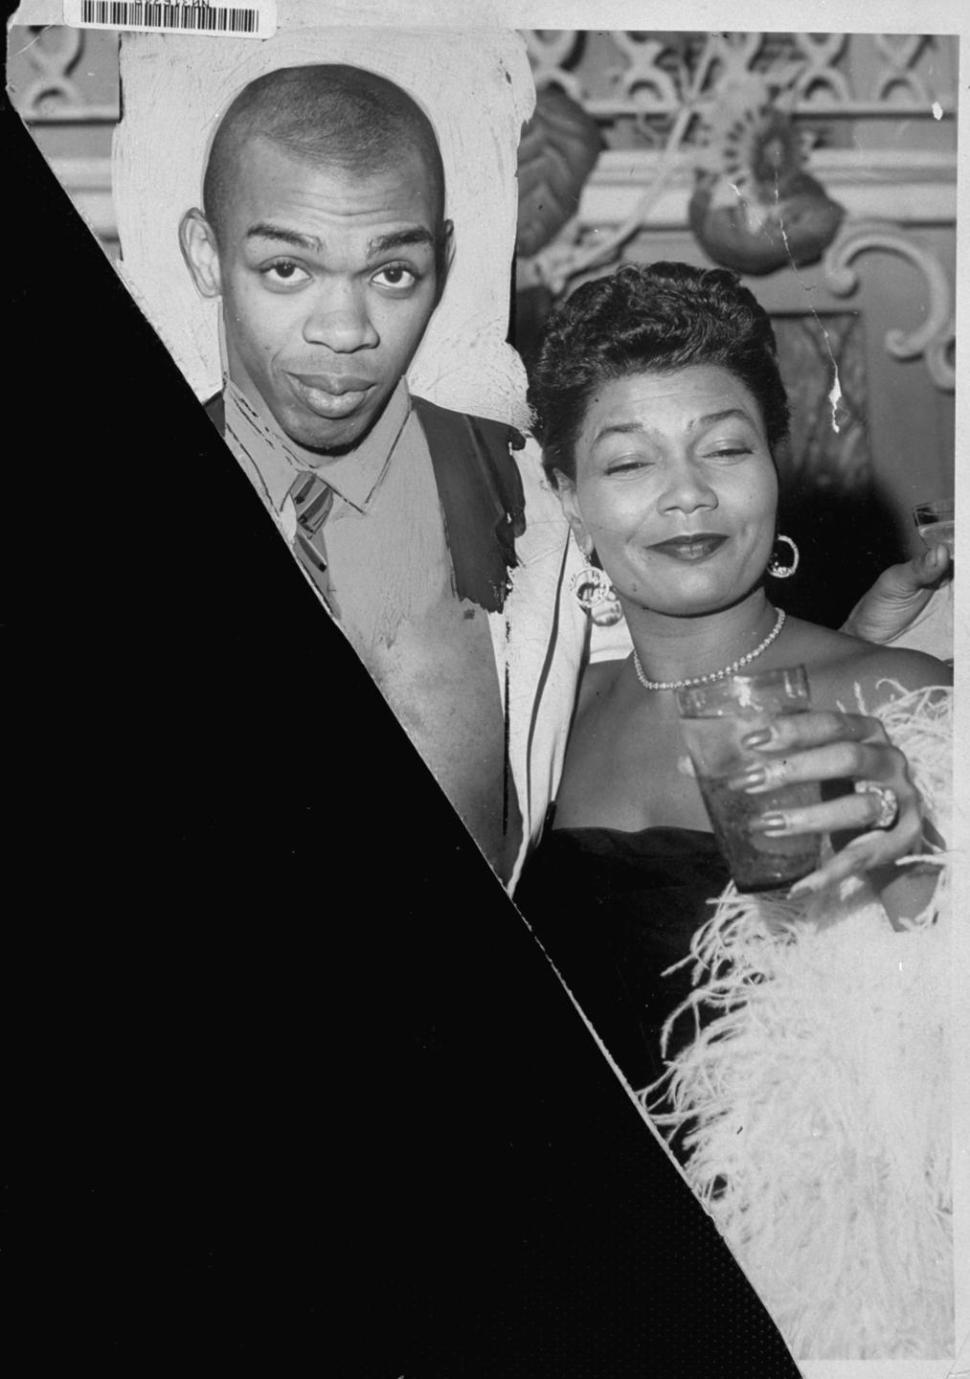 From left, Geoffrey Holder and wife Carmen De Lavallade married in 1955 after meeting and appearing in 'House of Flowers' on Broadway.